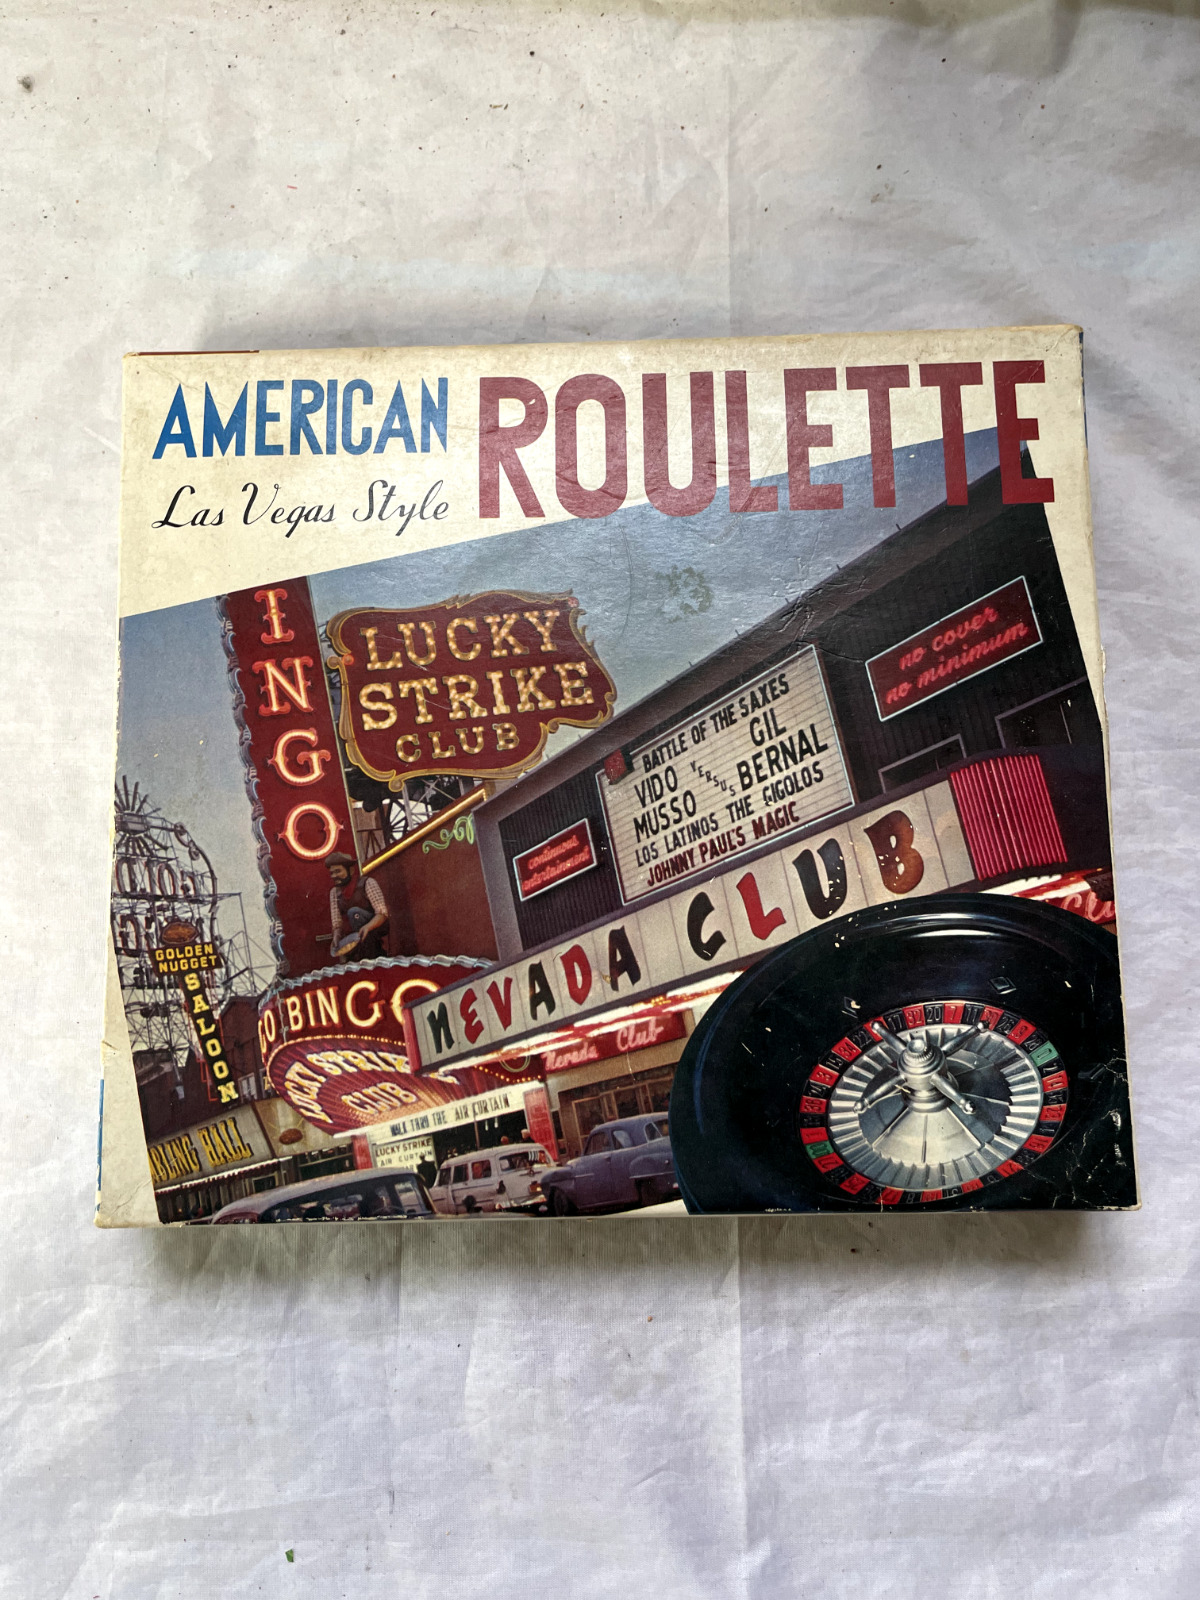 Vintage ATC Las Vegas Style American Roulette Game - Made in Japan